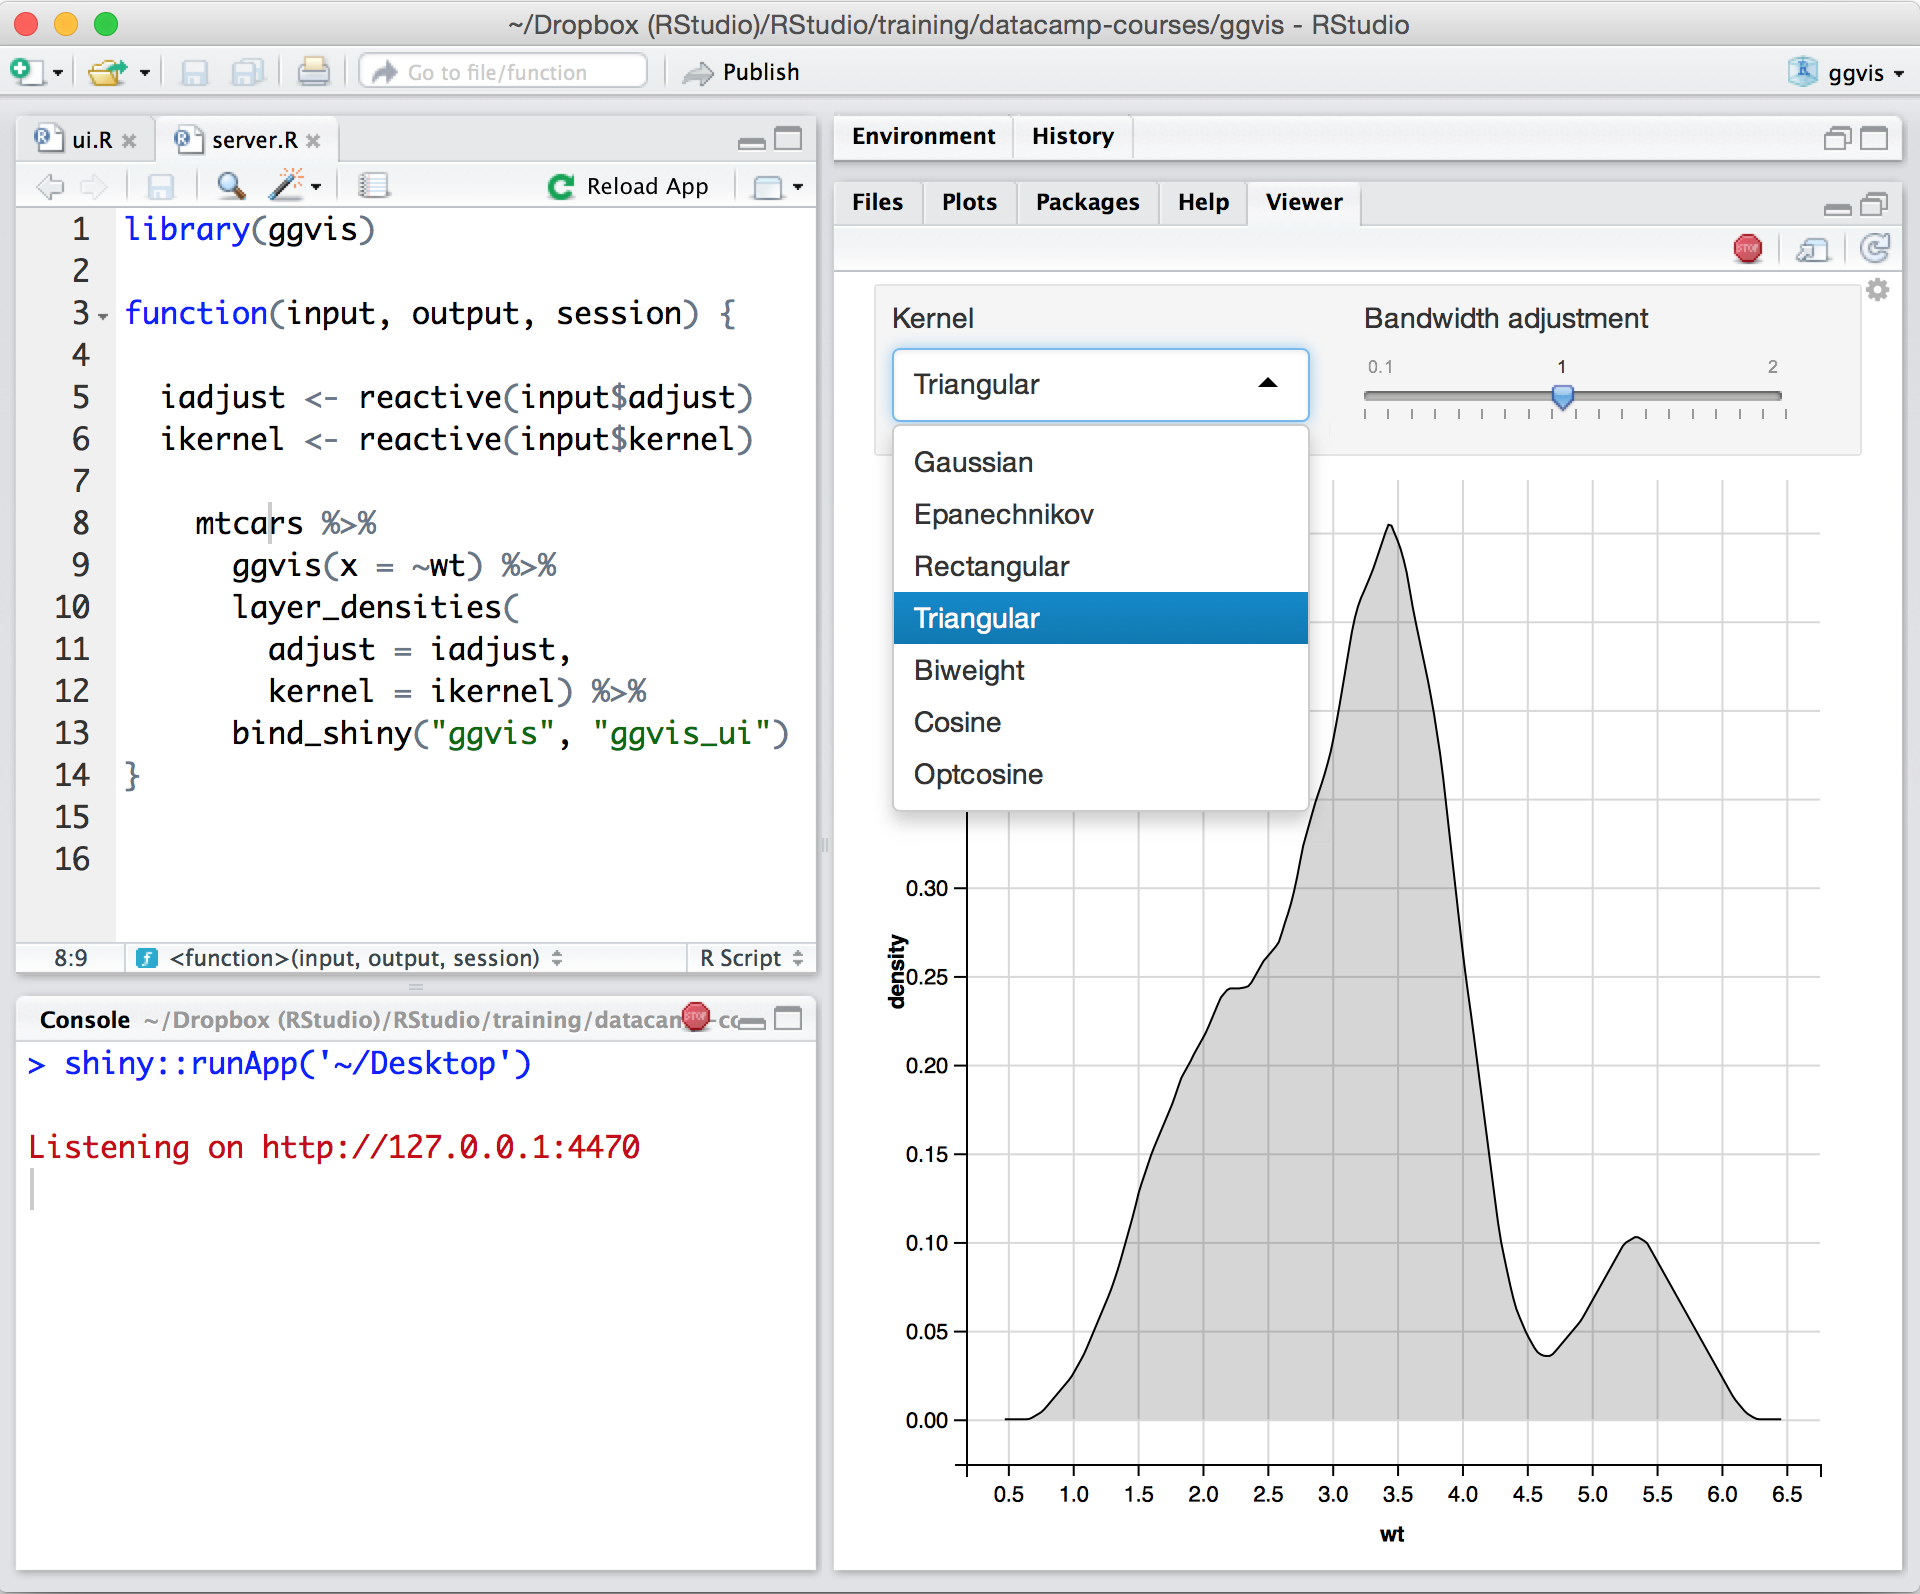 shiny from rstudio